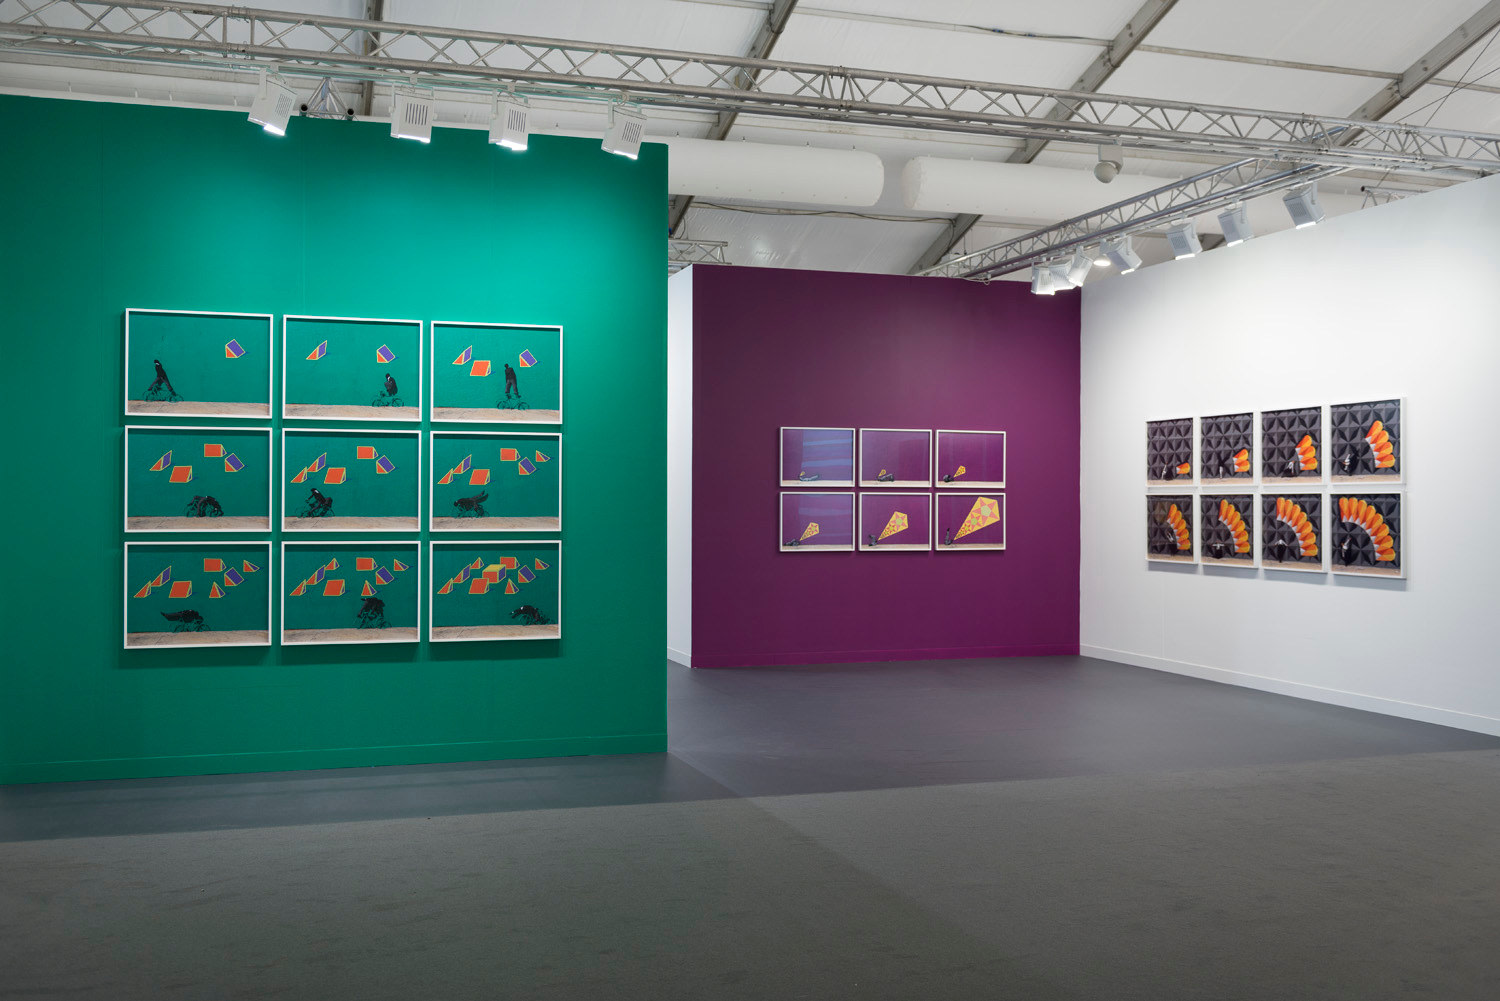 Installation view of Lehmann Maupin's booth at Frieze art fair in London 2019, view 3